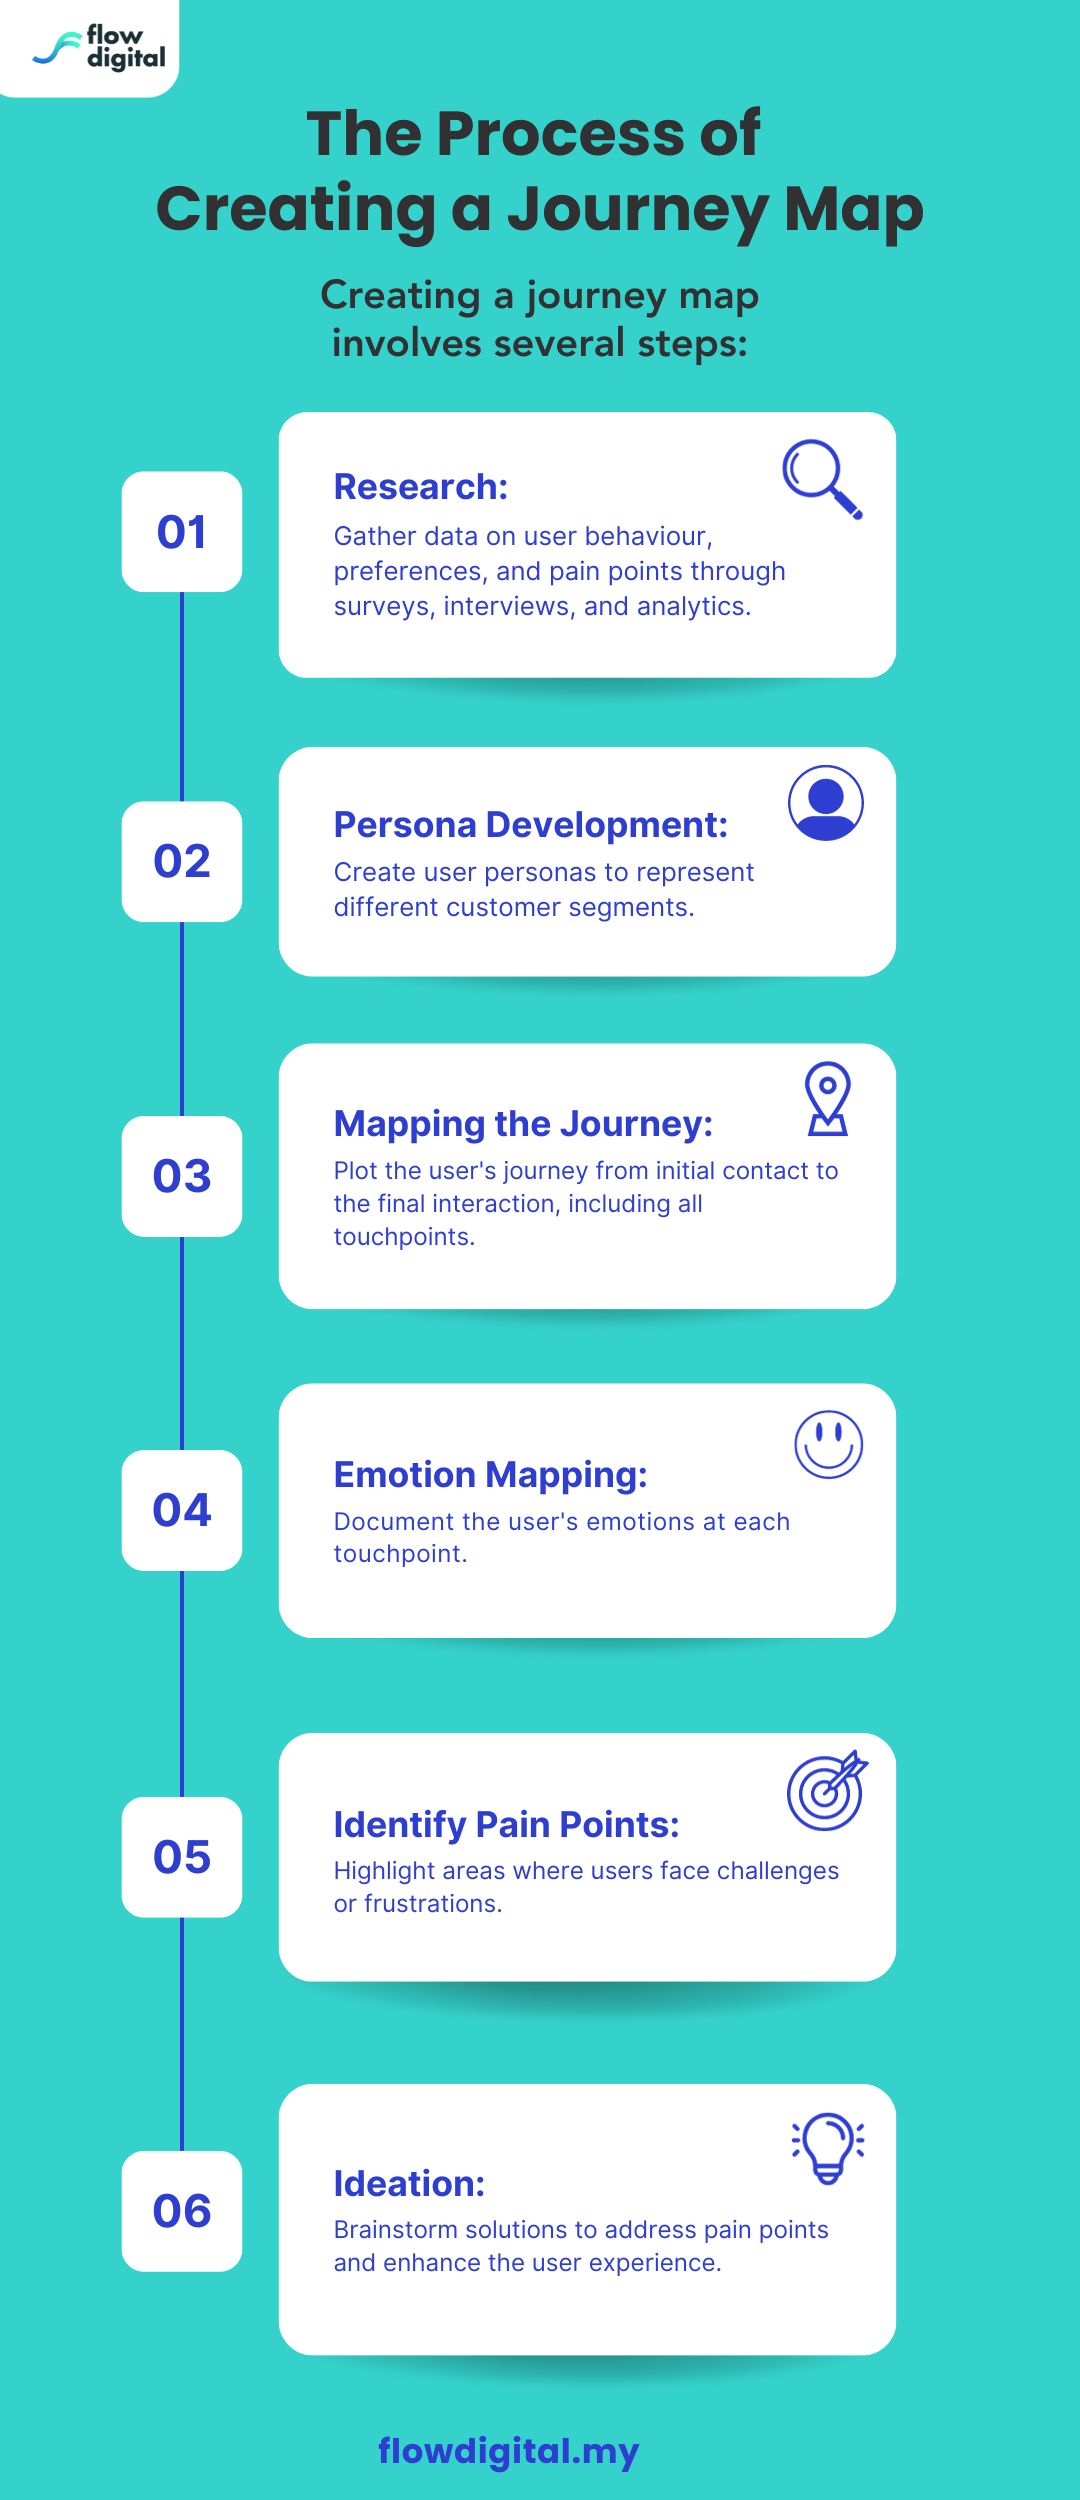 The Process of Creating a Journey Map infographic by flow digital